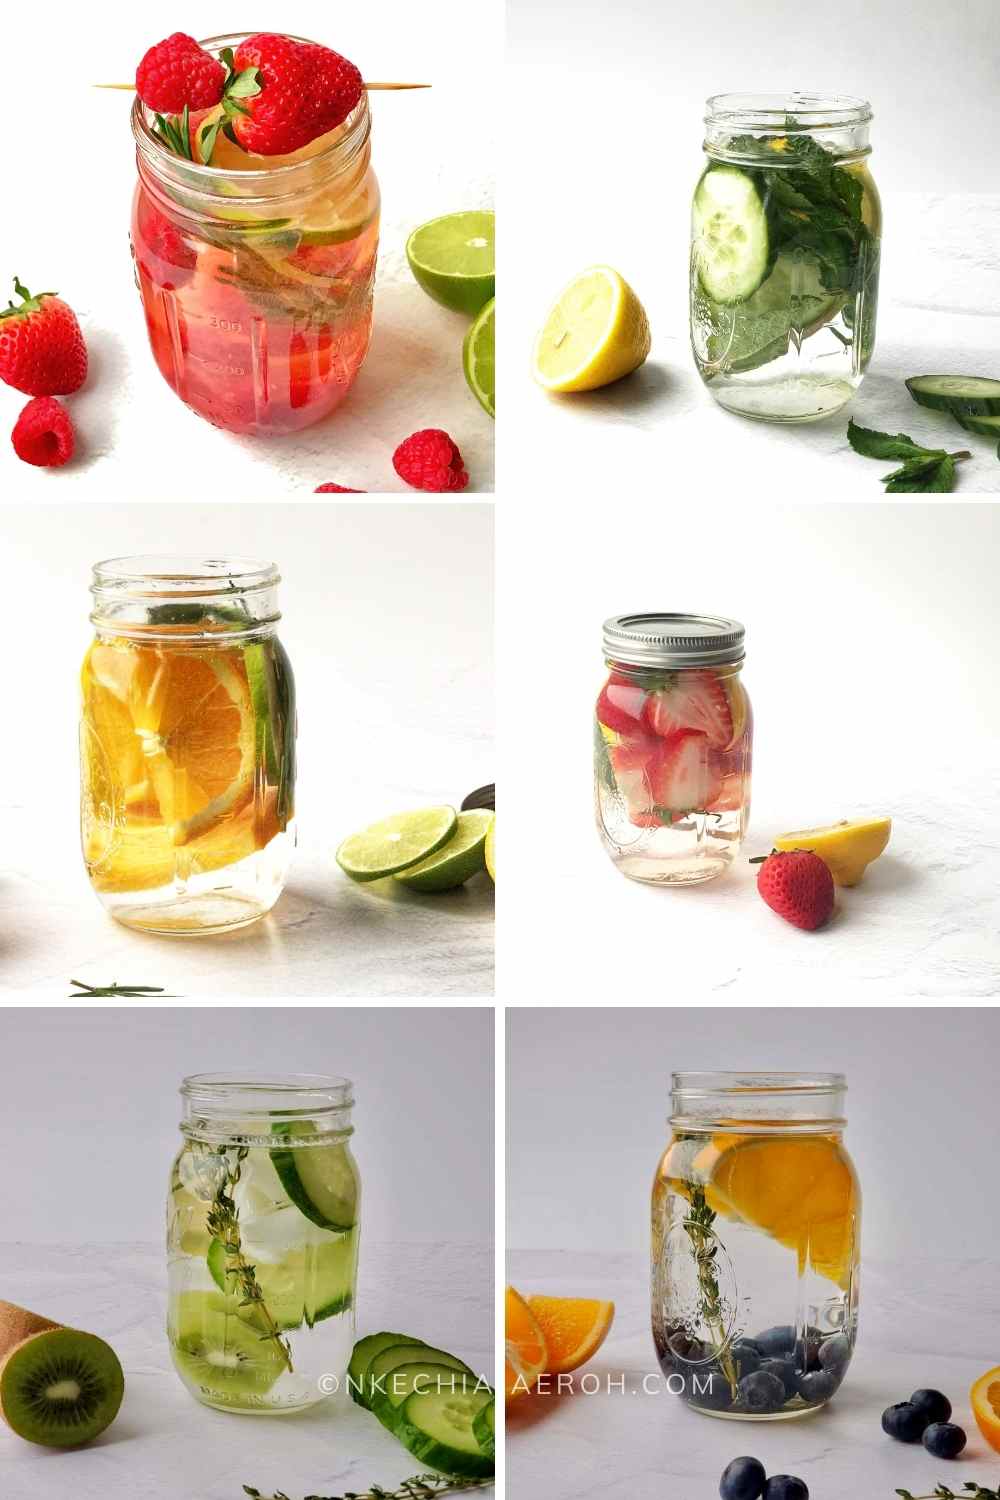 Best Infused water recipes for glowing skin Drink more water with DIY naturally flavored water, aka homemade fruit water! These fruit infused water recipes for glowing skin are health-improving, refreshing, and will surely keep you hydrated. Fruit-flavored water comes in handy during warm weather as we naturally tend to drink more water then. With these fruit water recipes, you can confidently keep the summer heat at bay and stay hydrated as you should. #Infusedwater #fruitwater #vitaminwater #DIYfruitinfusedwater #detoxwater